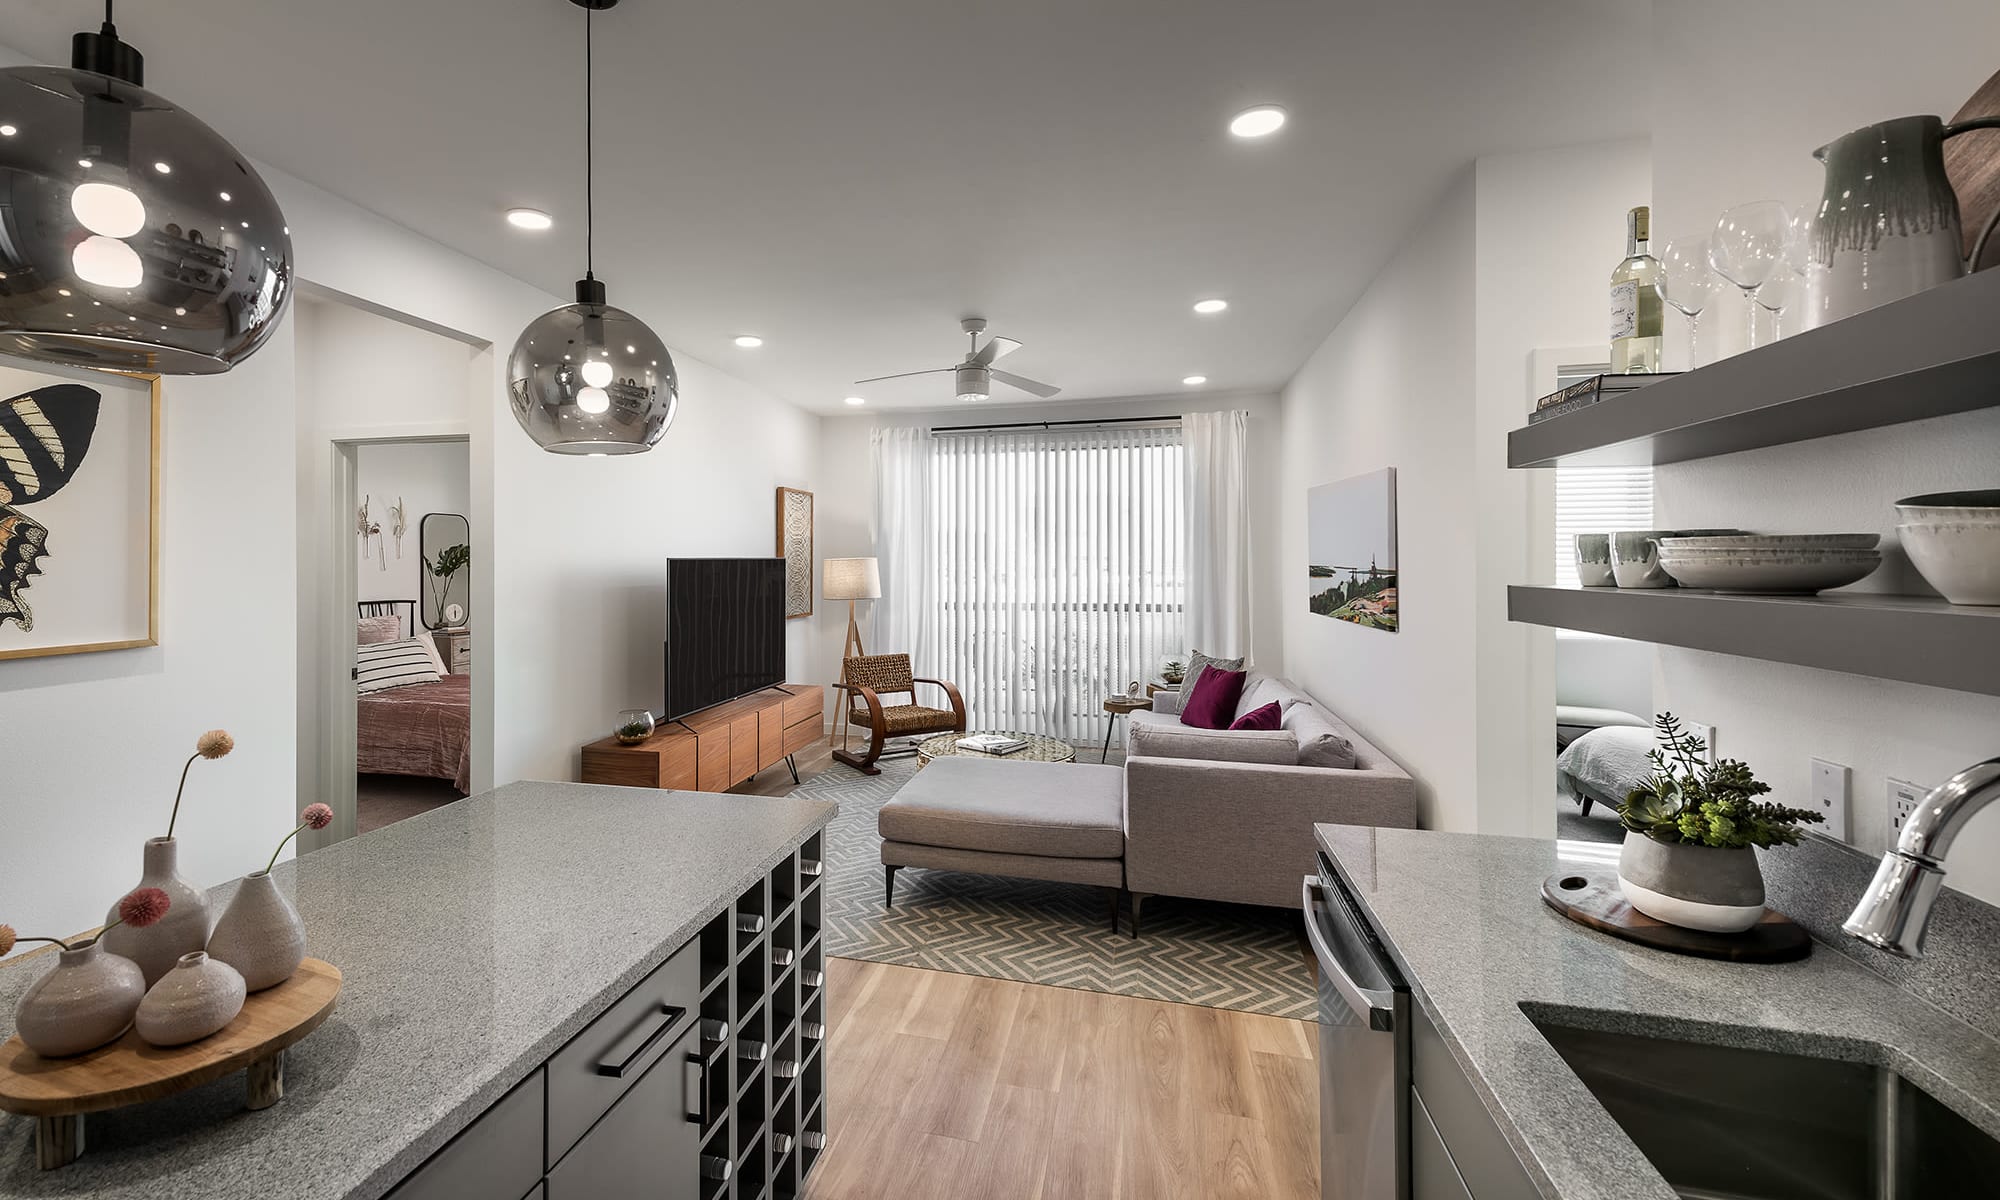 Luxurious kitchen and living space at The Piedmont in Tempe, Arizona